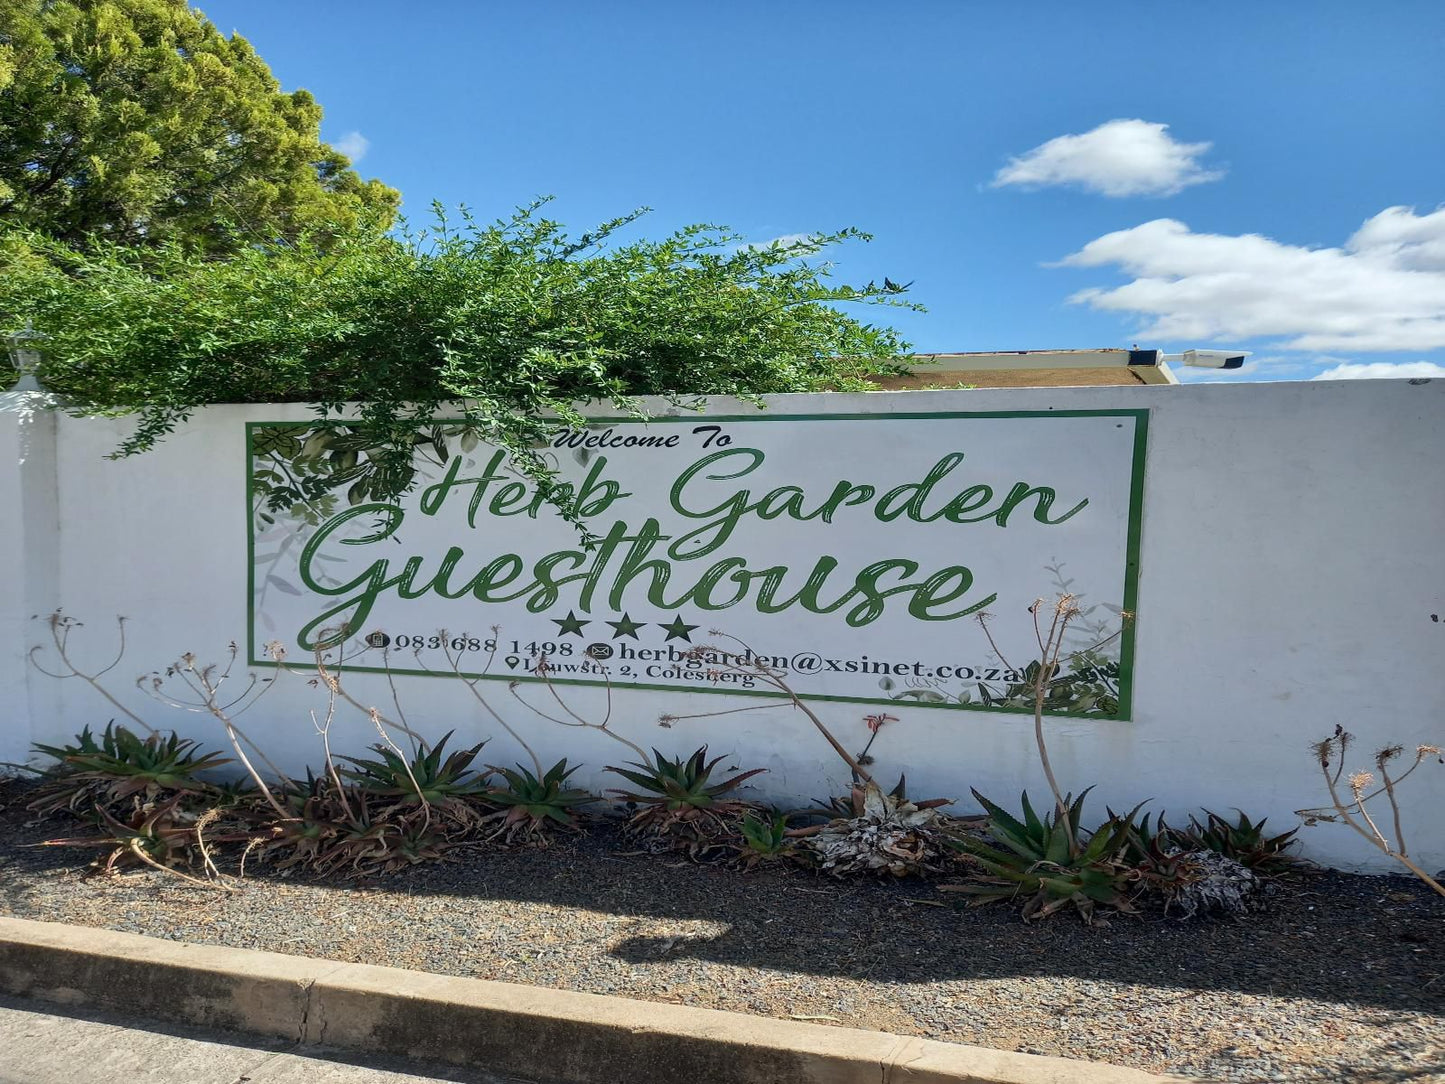 Herb Garden Guest House Colesberg Northern Cape South Africa Sign